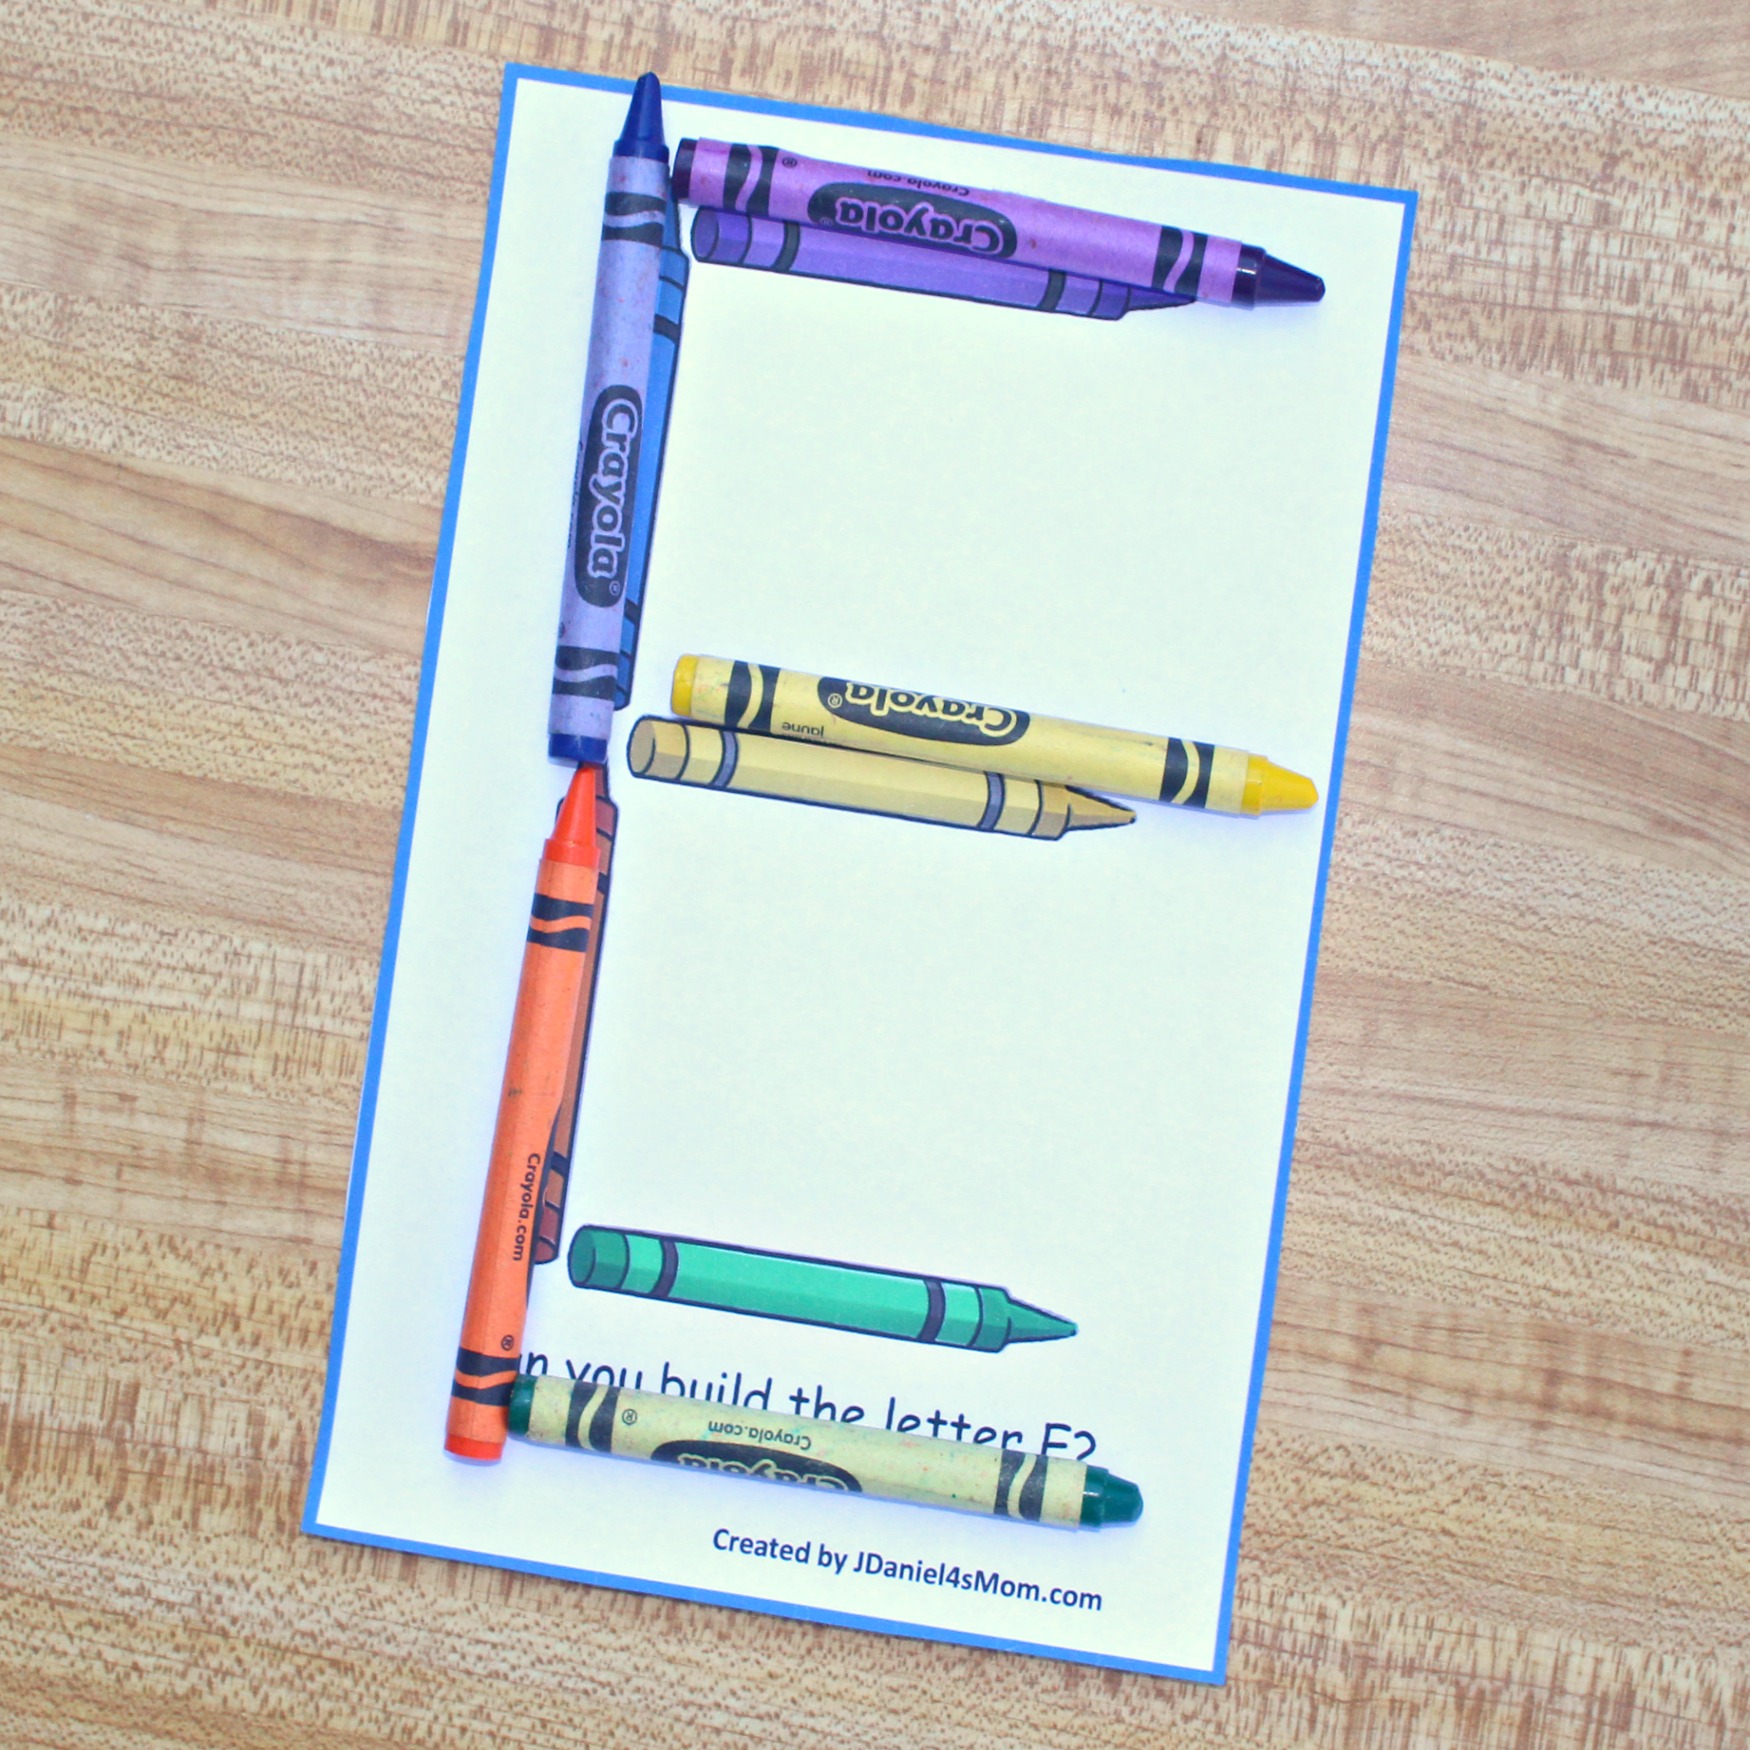 Letter Letters with Crayons Printable Task Cards - M and N Letter Cards - Matching Crayons to the Letters on the Cards